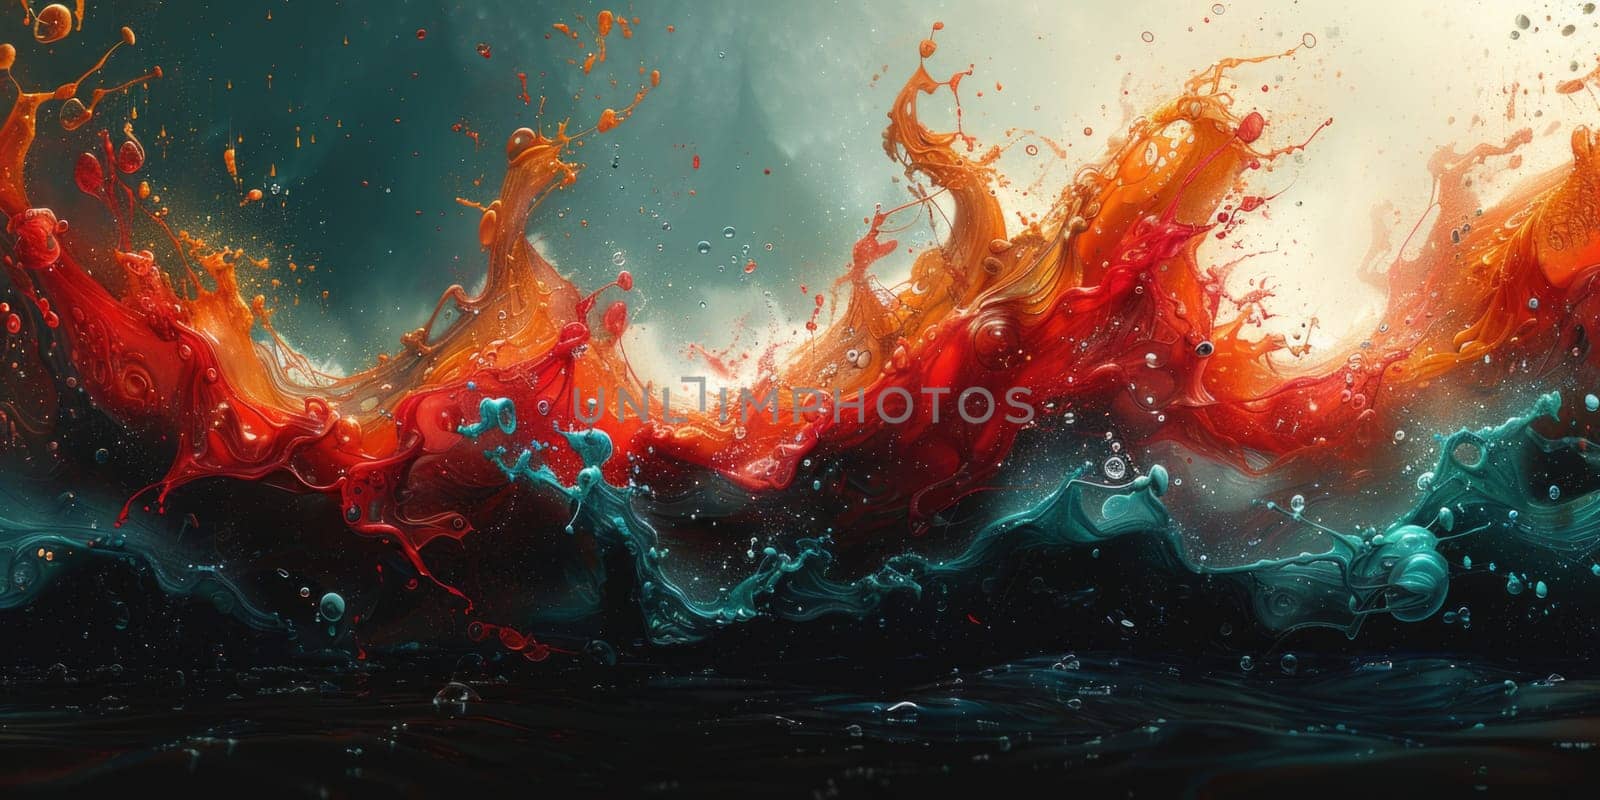 A hyper-realistic 3D illustration of a red and blue wave crashing on a shore.